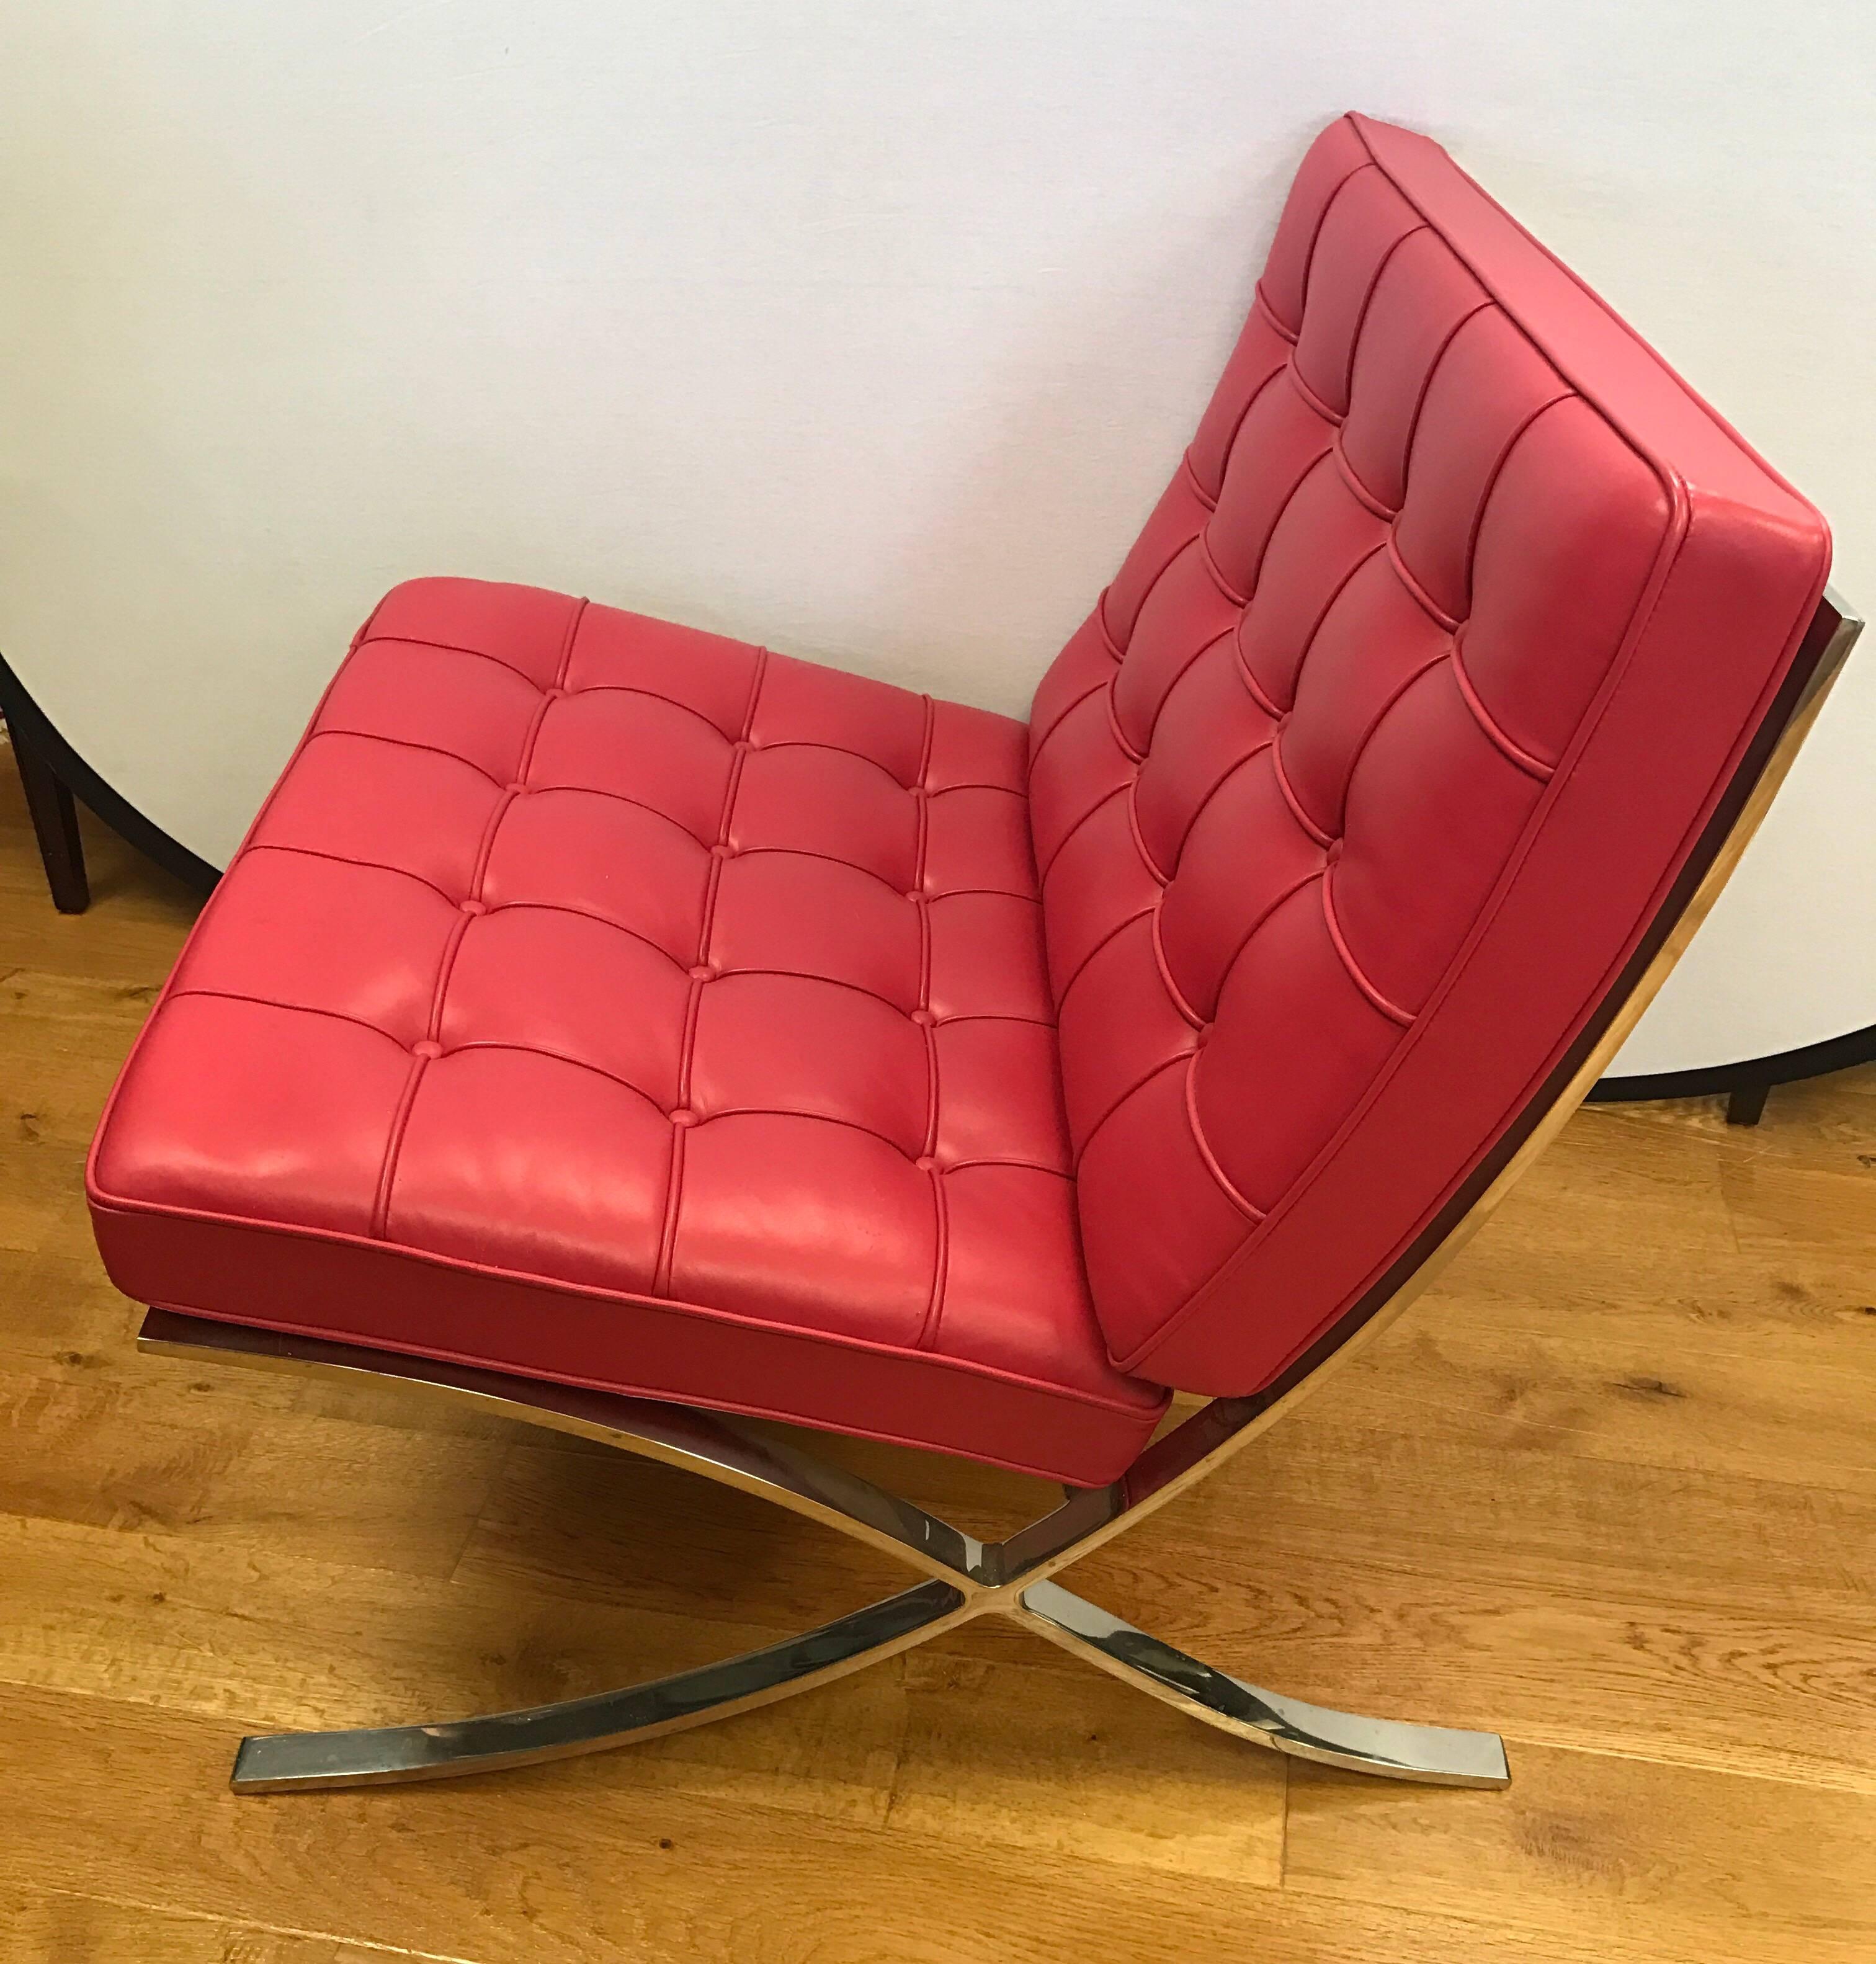 American Knoll Signed Rare Magenta Colored Leather Barcelona Chair Mies van der Rohe